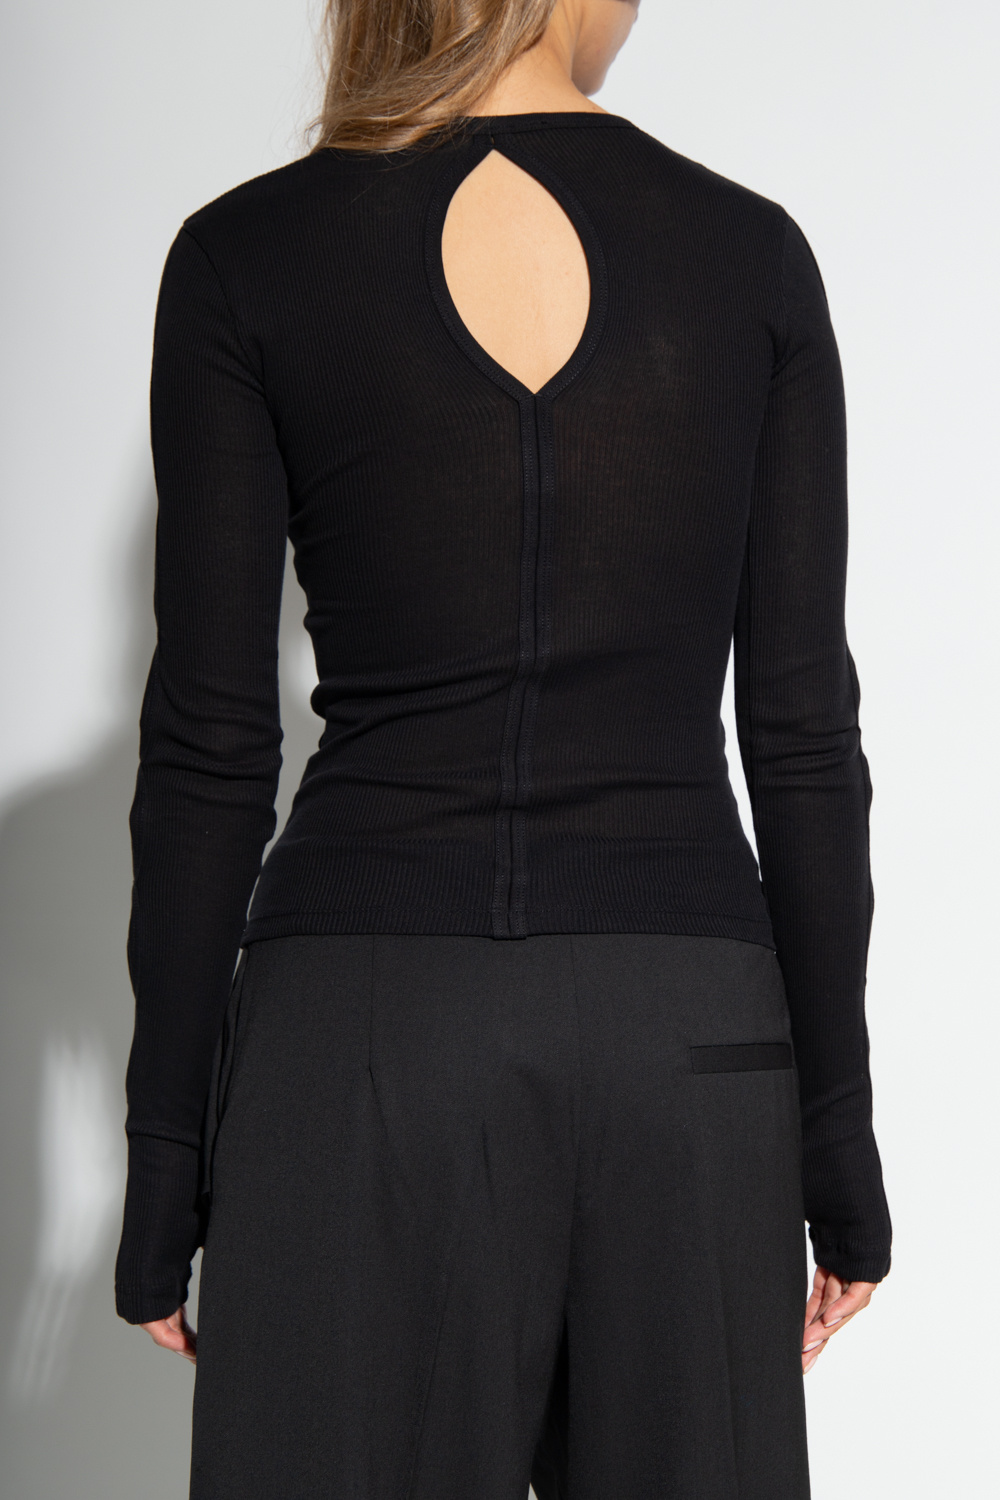 Helmut Lang Top with cut-outs